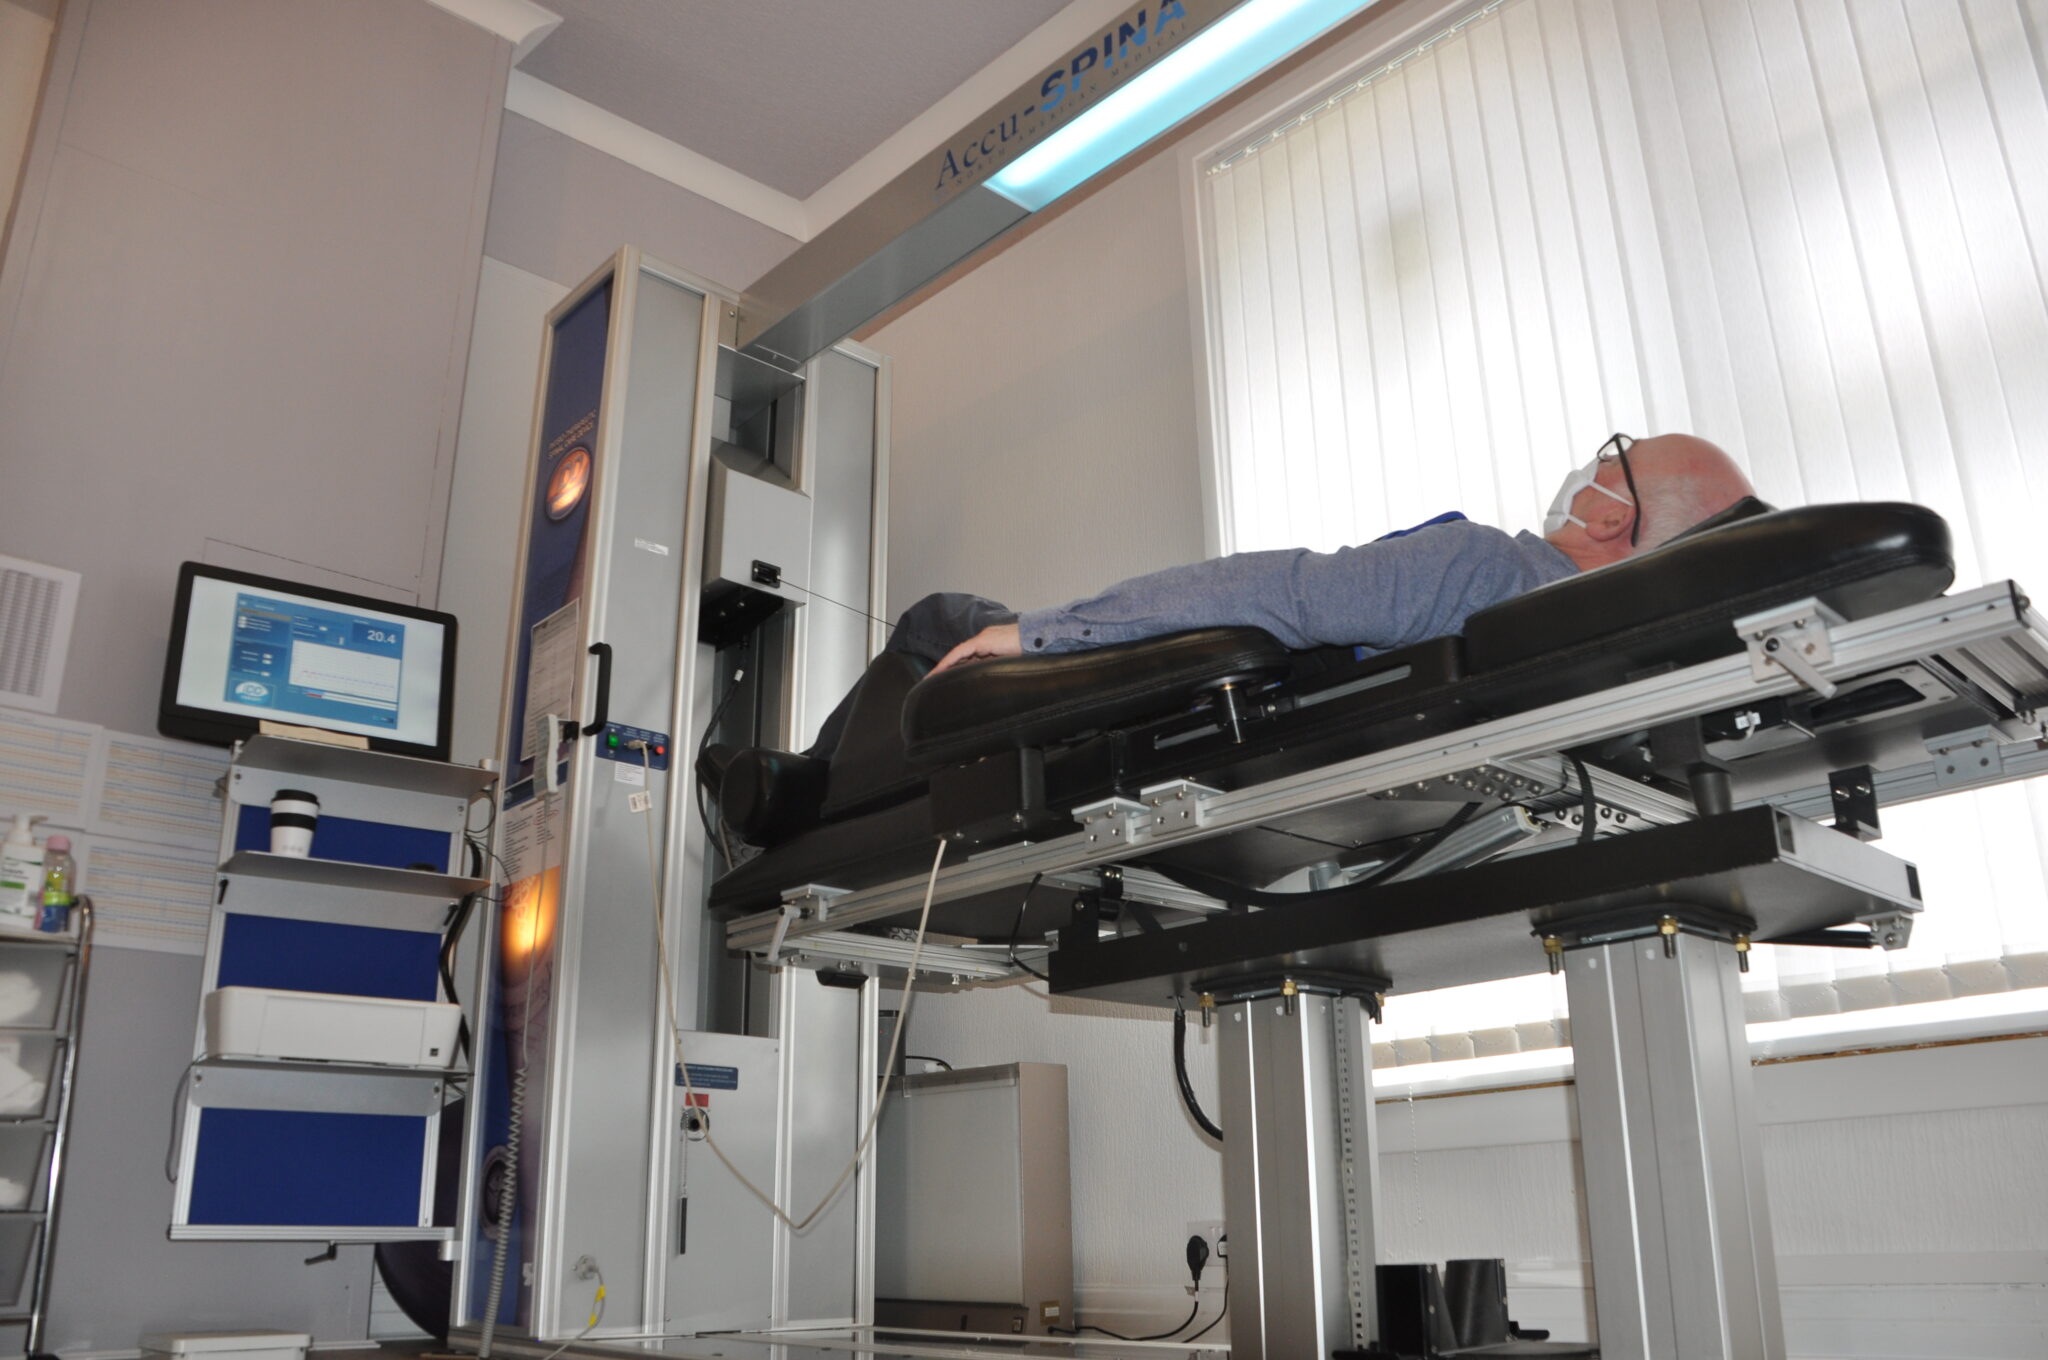 IDD Therapy at Bolton Spinal Health. The image shows a man on the IDD Therapy machine at Bolton Spinal Health.